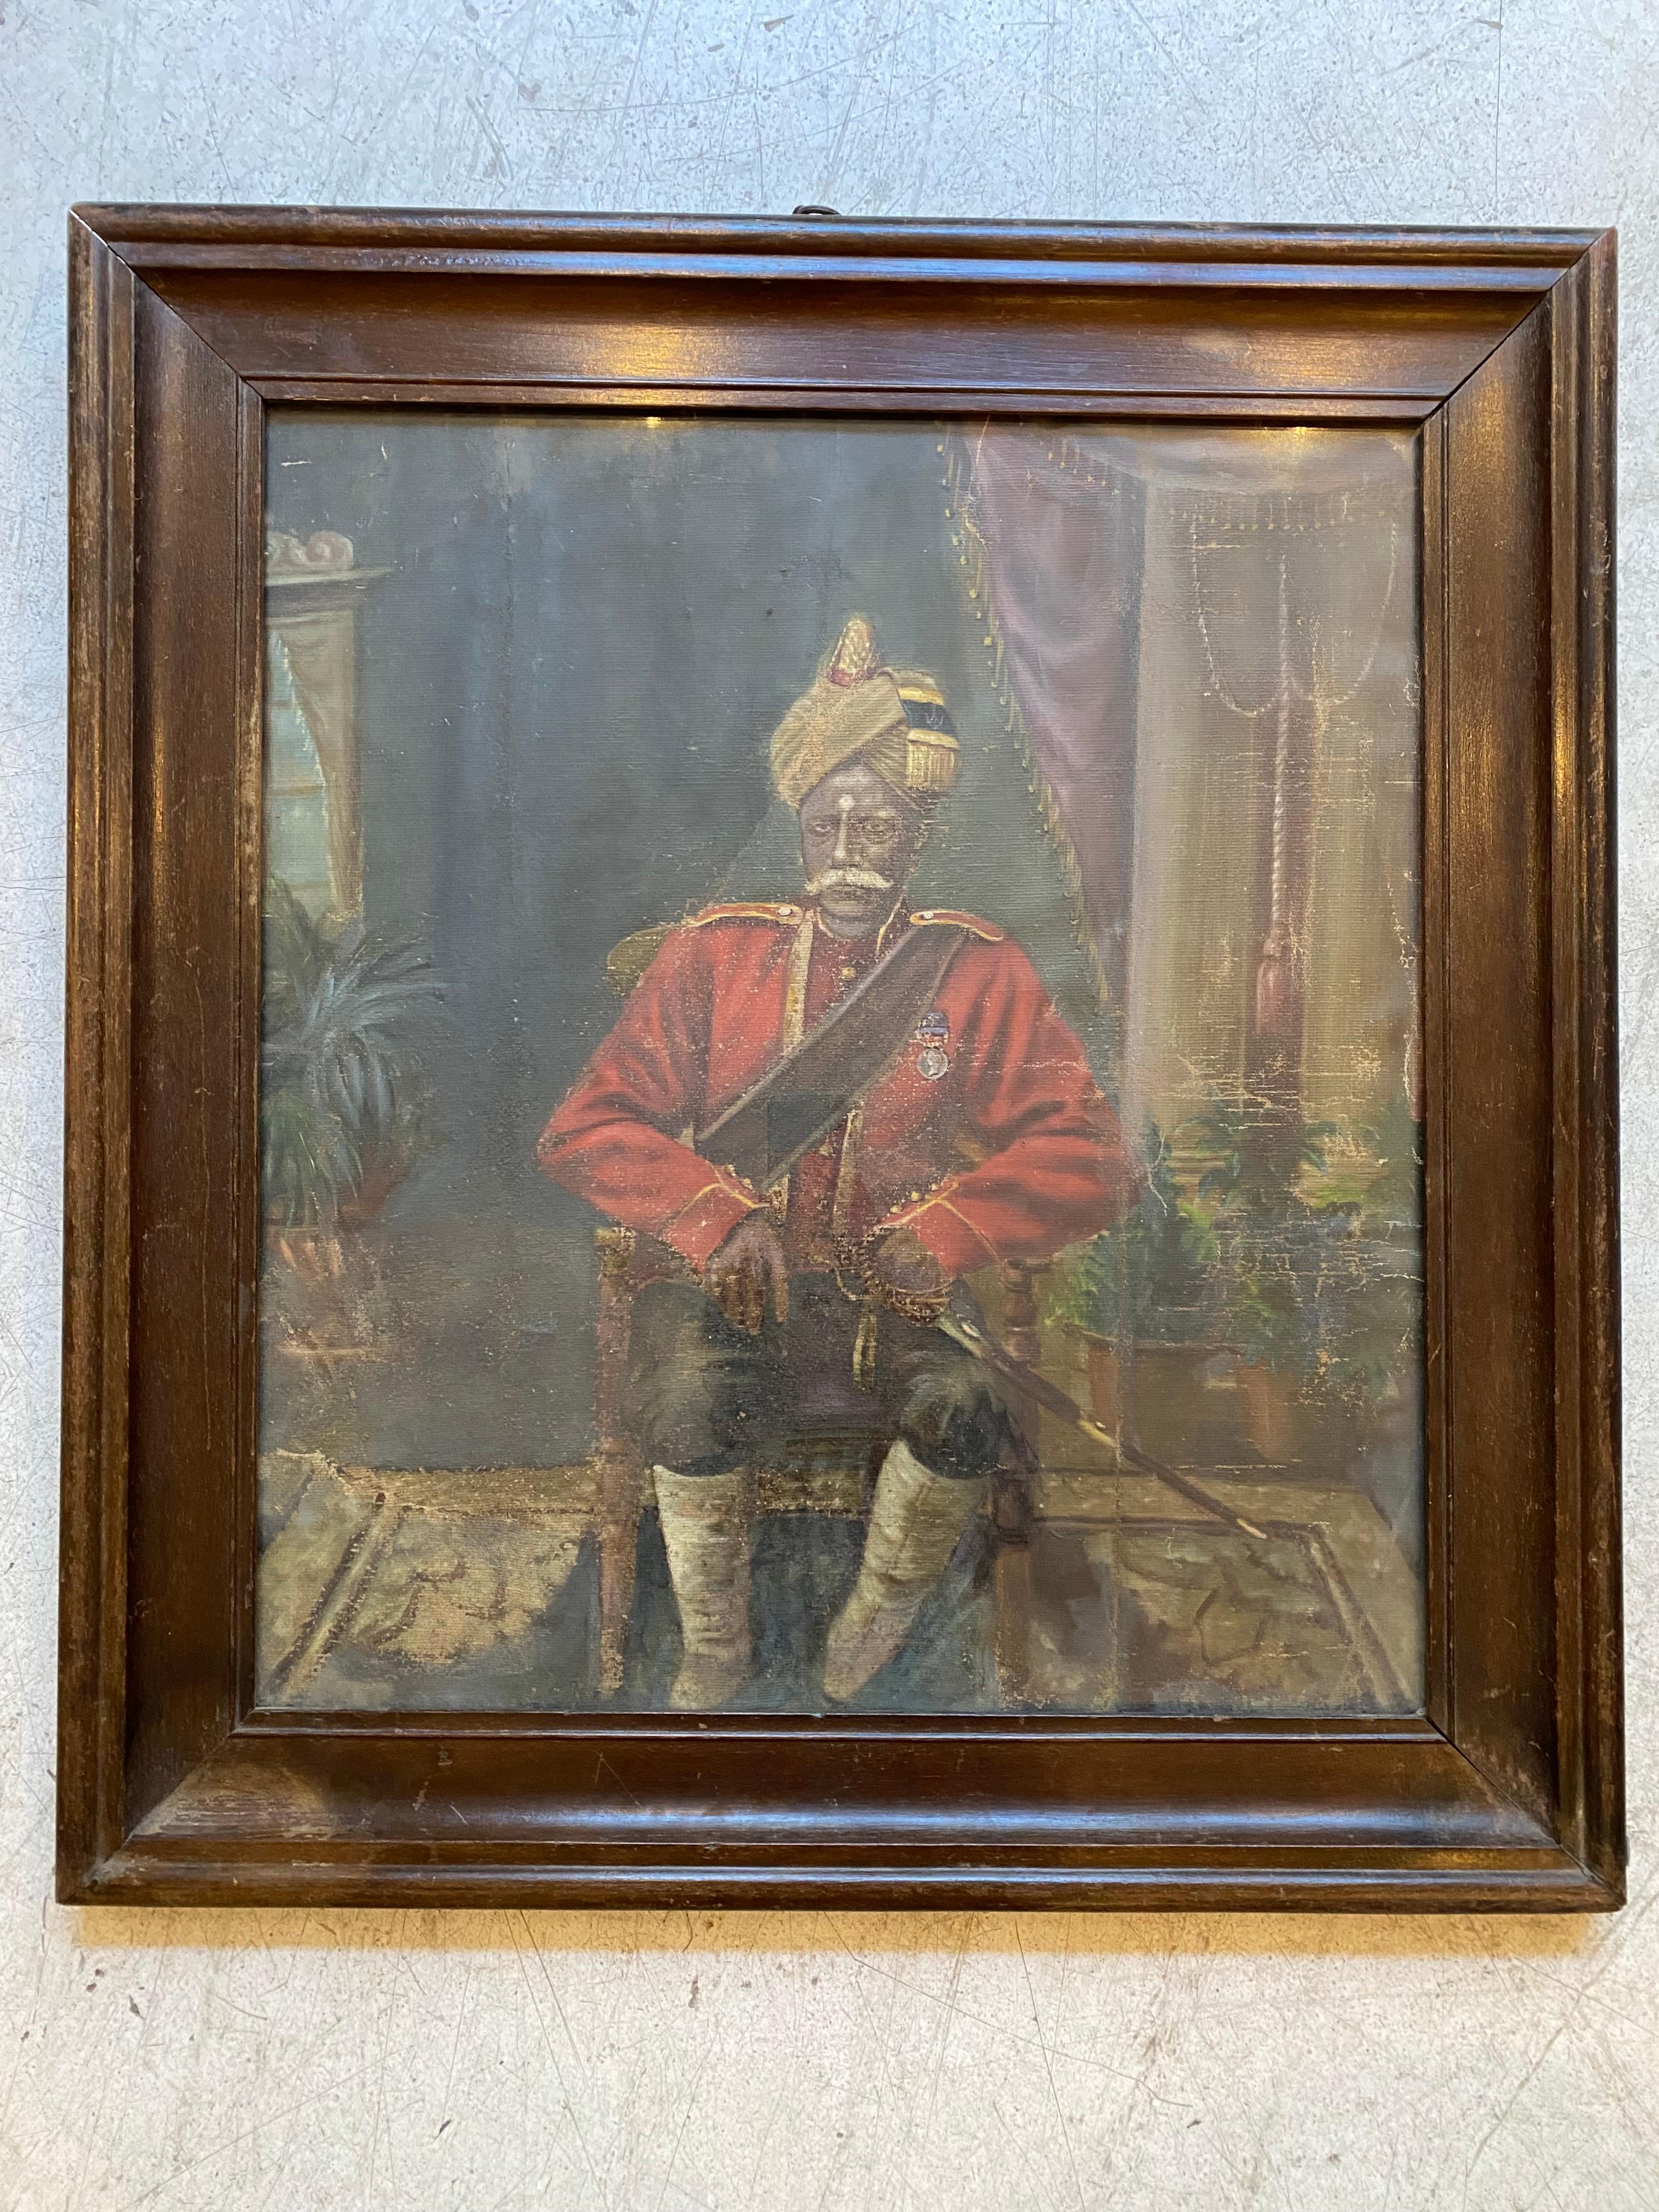 Nice Portrait of a Maharaja wearing milirary clothes. This elegant Indian with dark skin takes place in an élégant room typical of Indian antiques palaces. 
This oil on Canva is framed in an elegant teakwood frame under glass. 
Work by Indian